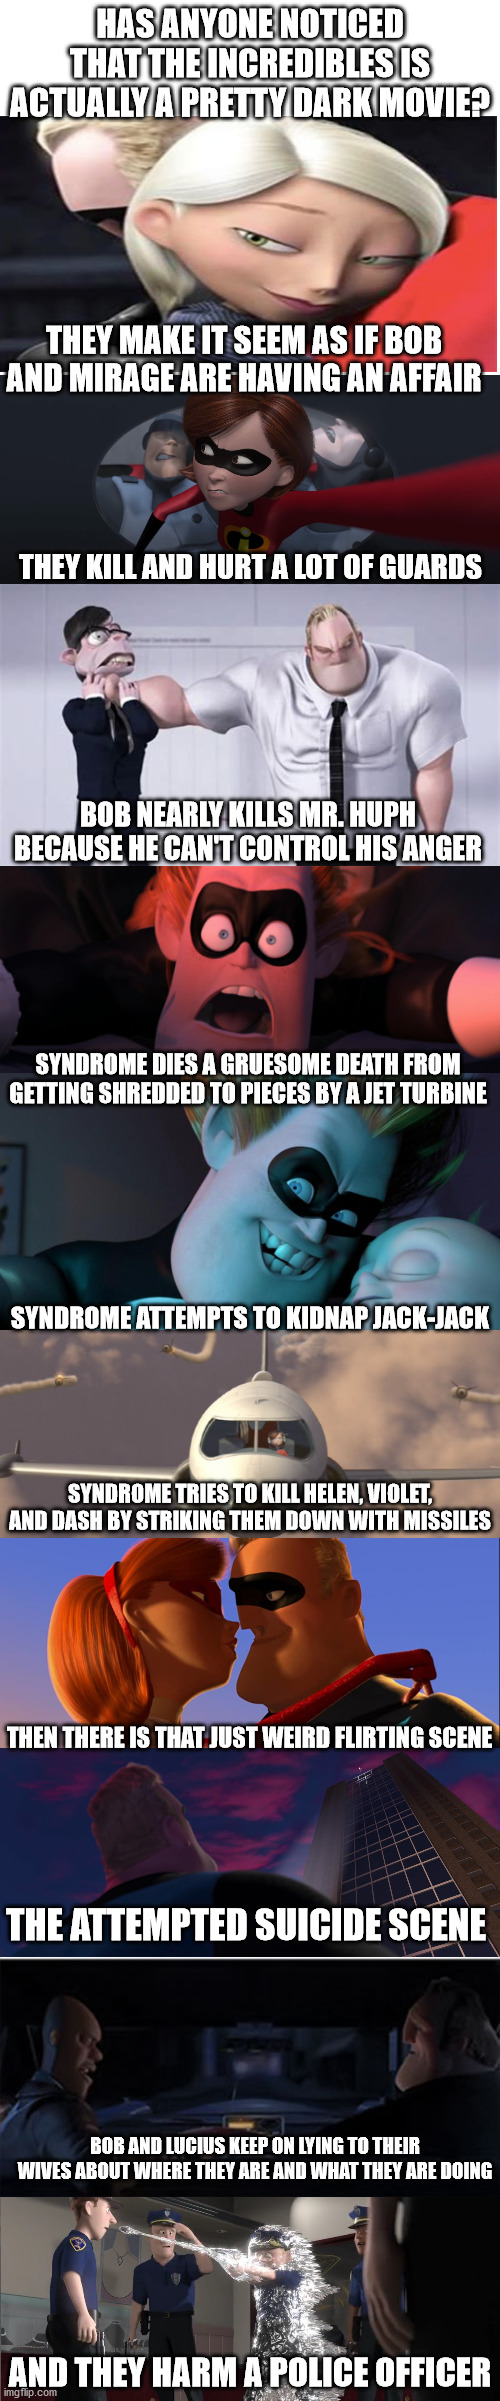 sorry if this is long but it is so true. just think about it. | HAS ANYONE NOTICED THAT THE INCREDIBLES IS ACTUALLY A PRETTY DARK MOVIE? THEY MAKE IT SEEM AS IF BOB AND MIRAGE ARE HAVING AN AFFAIR; THEY KILL AND HURT A LOT OF GUARDS; BOB NEARLY KILLS MR. HUPH BECAUSE HE CAN'T CONTROL HIS ANGER; SYNDROME DIES A GRUESOME DEATH FROM GETTING SHREDDED TO PIECES BY A JET TURBINE; SYNDROME ATTEMPTS TO KIDNAP JACK-JACK; SYNDROME TRIES TO KILL HELEN, VIOLET, AND DASH BY STRIKING THEM DOWN WITH MISSILES; THEN THERE IS THAT JUST WEIRD FLIRTING SCENE; THE ATTEMPTED SUICIDE SCENE; BOB AND LUCIUS KEEP ON LYING TO THEIR WIVES ABOUT WHERE THEY ARE AND WHAT THEY ARE DOING; AND THEY HARM A POLICE OFFICER | image tagged in blank white template,the incredibles | made w/ Imgflip meme maker